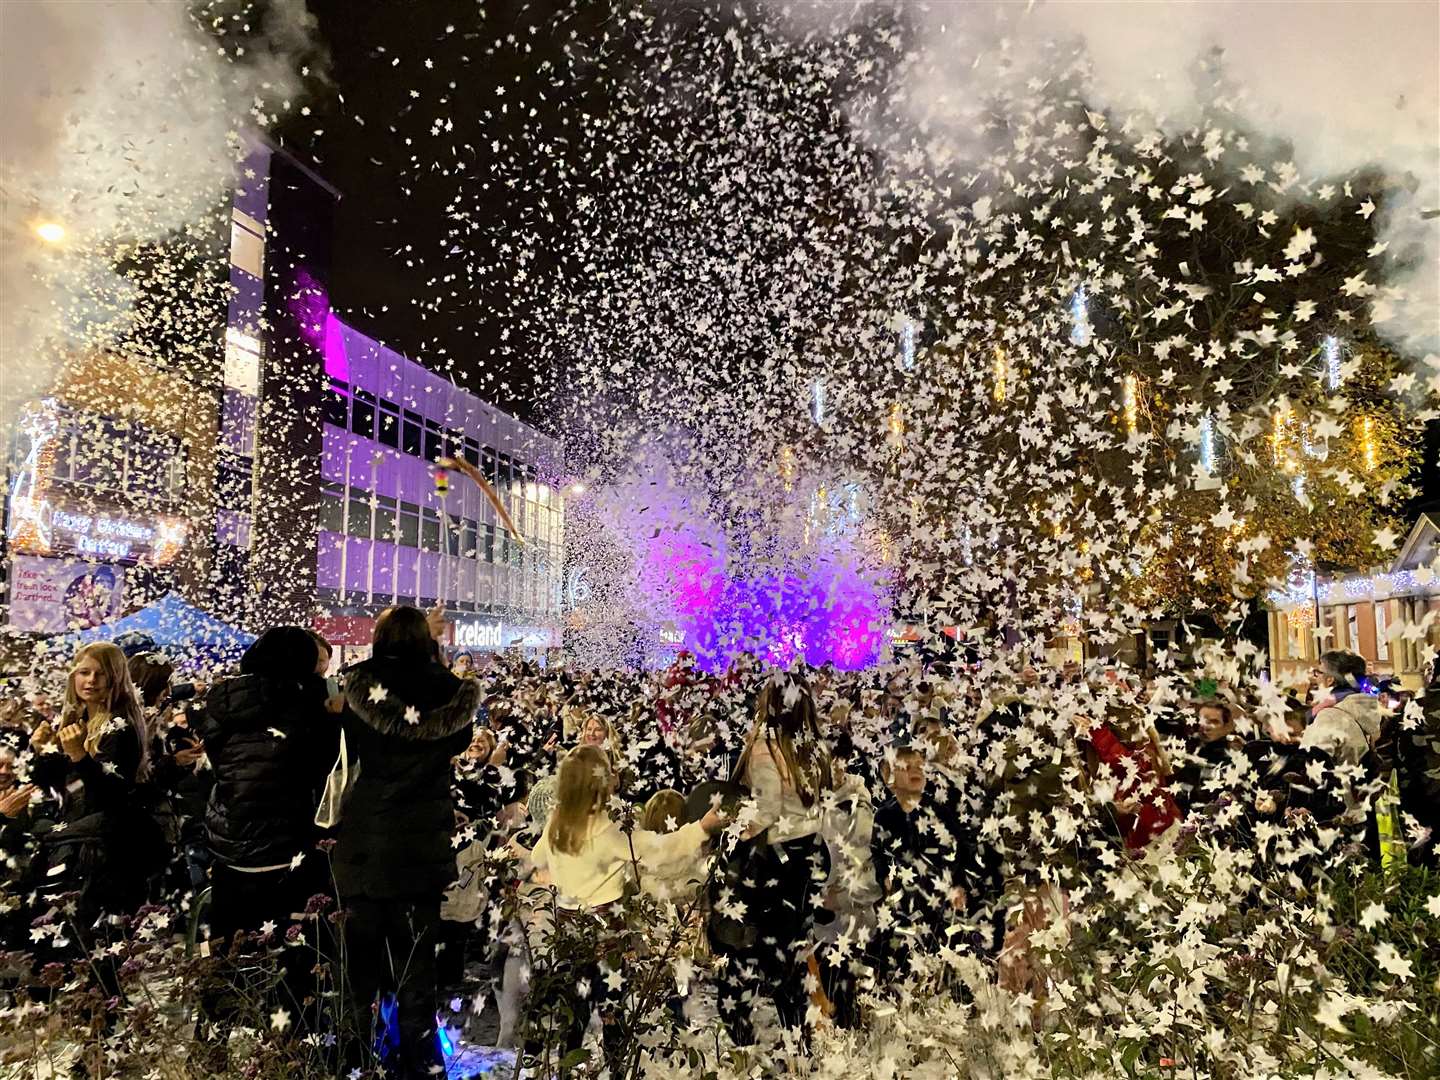 Snow rained down on the crowds. Picture: Dartford Borough Council